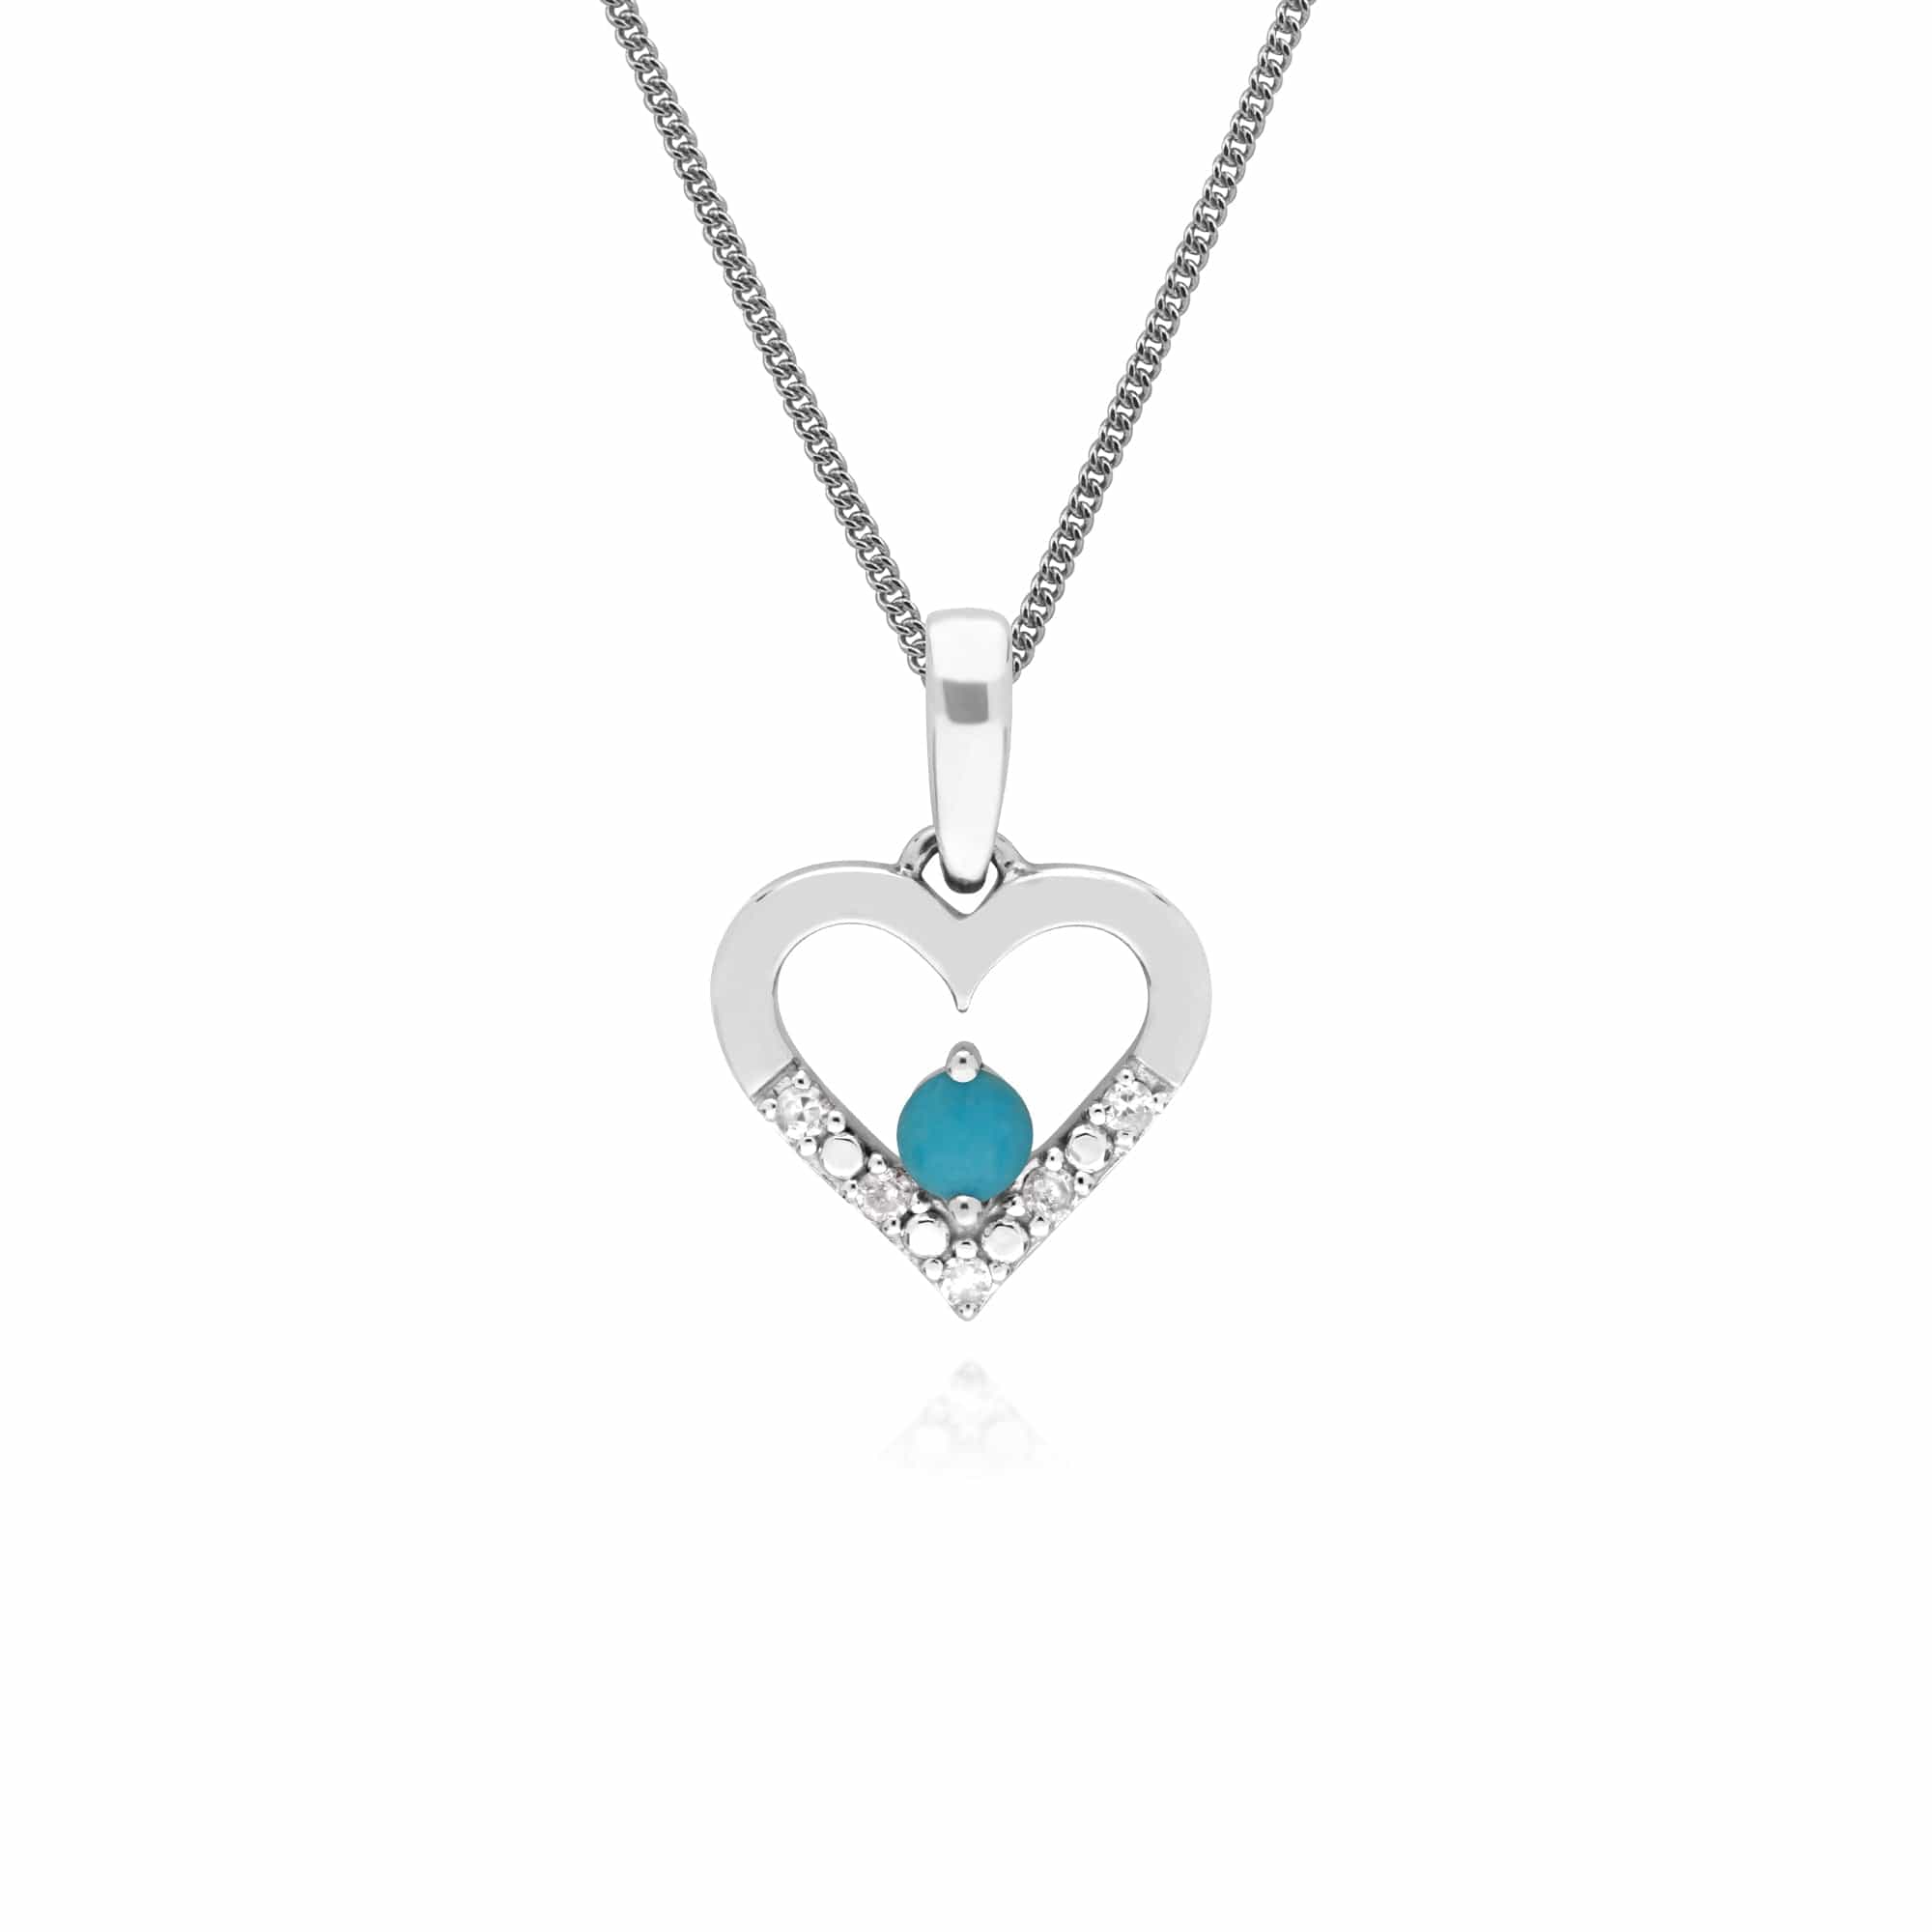 162E0260019-162P0221019 Classic Round Turquoise & Diamond Heart Drop Earrings & Pendant Set in 9ct White Gold 3